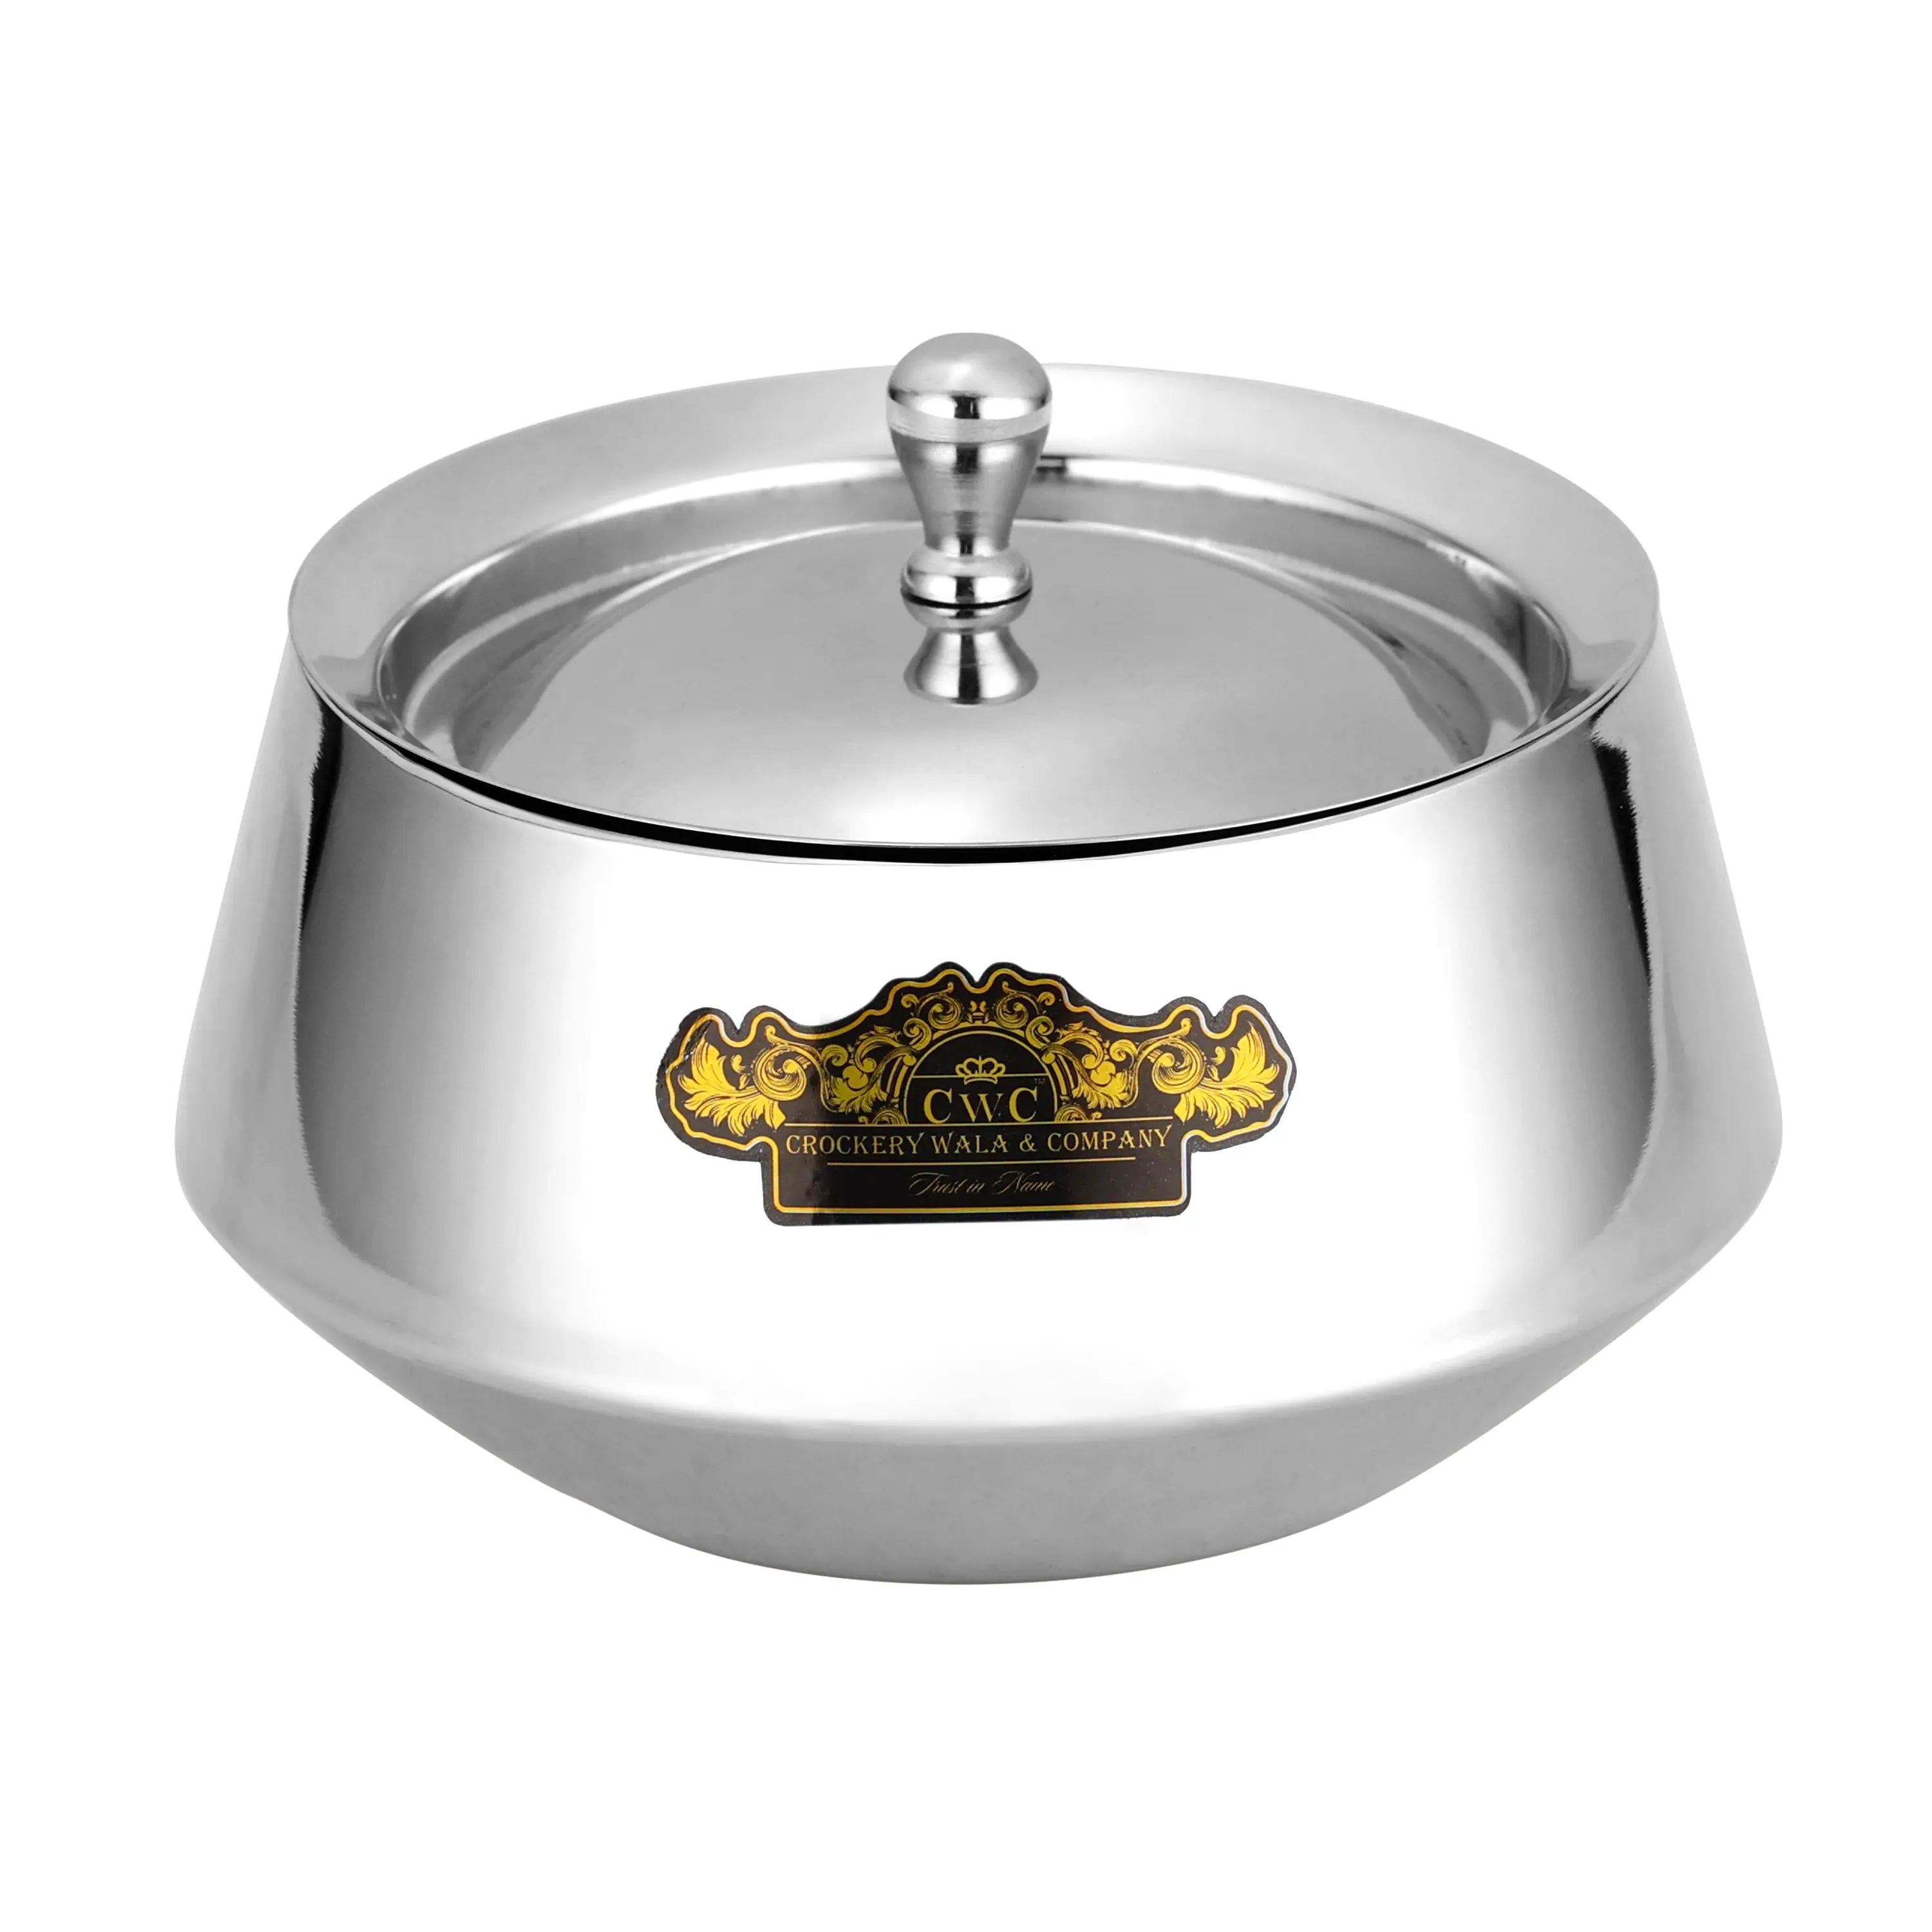 STAINLESS STEEL SERVING BOWL DOUBLE WALL - CROCKERY WALA AND COMPANY 